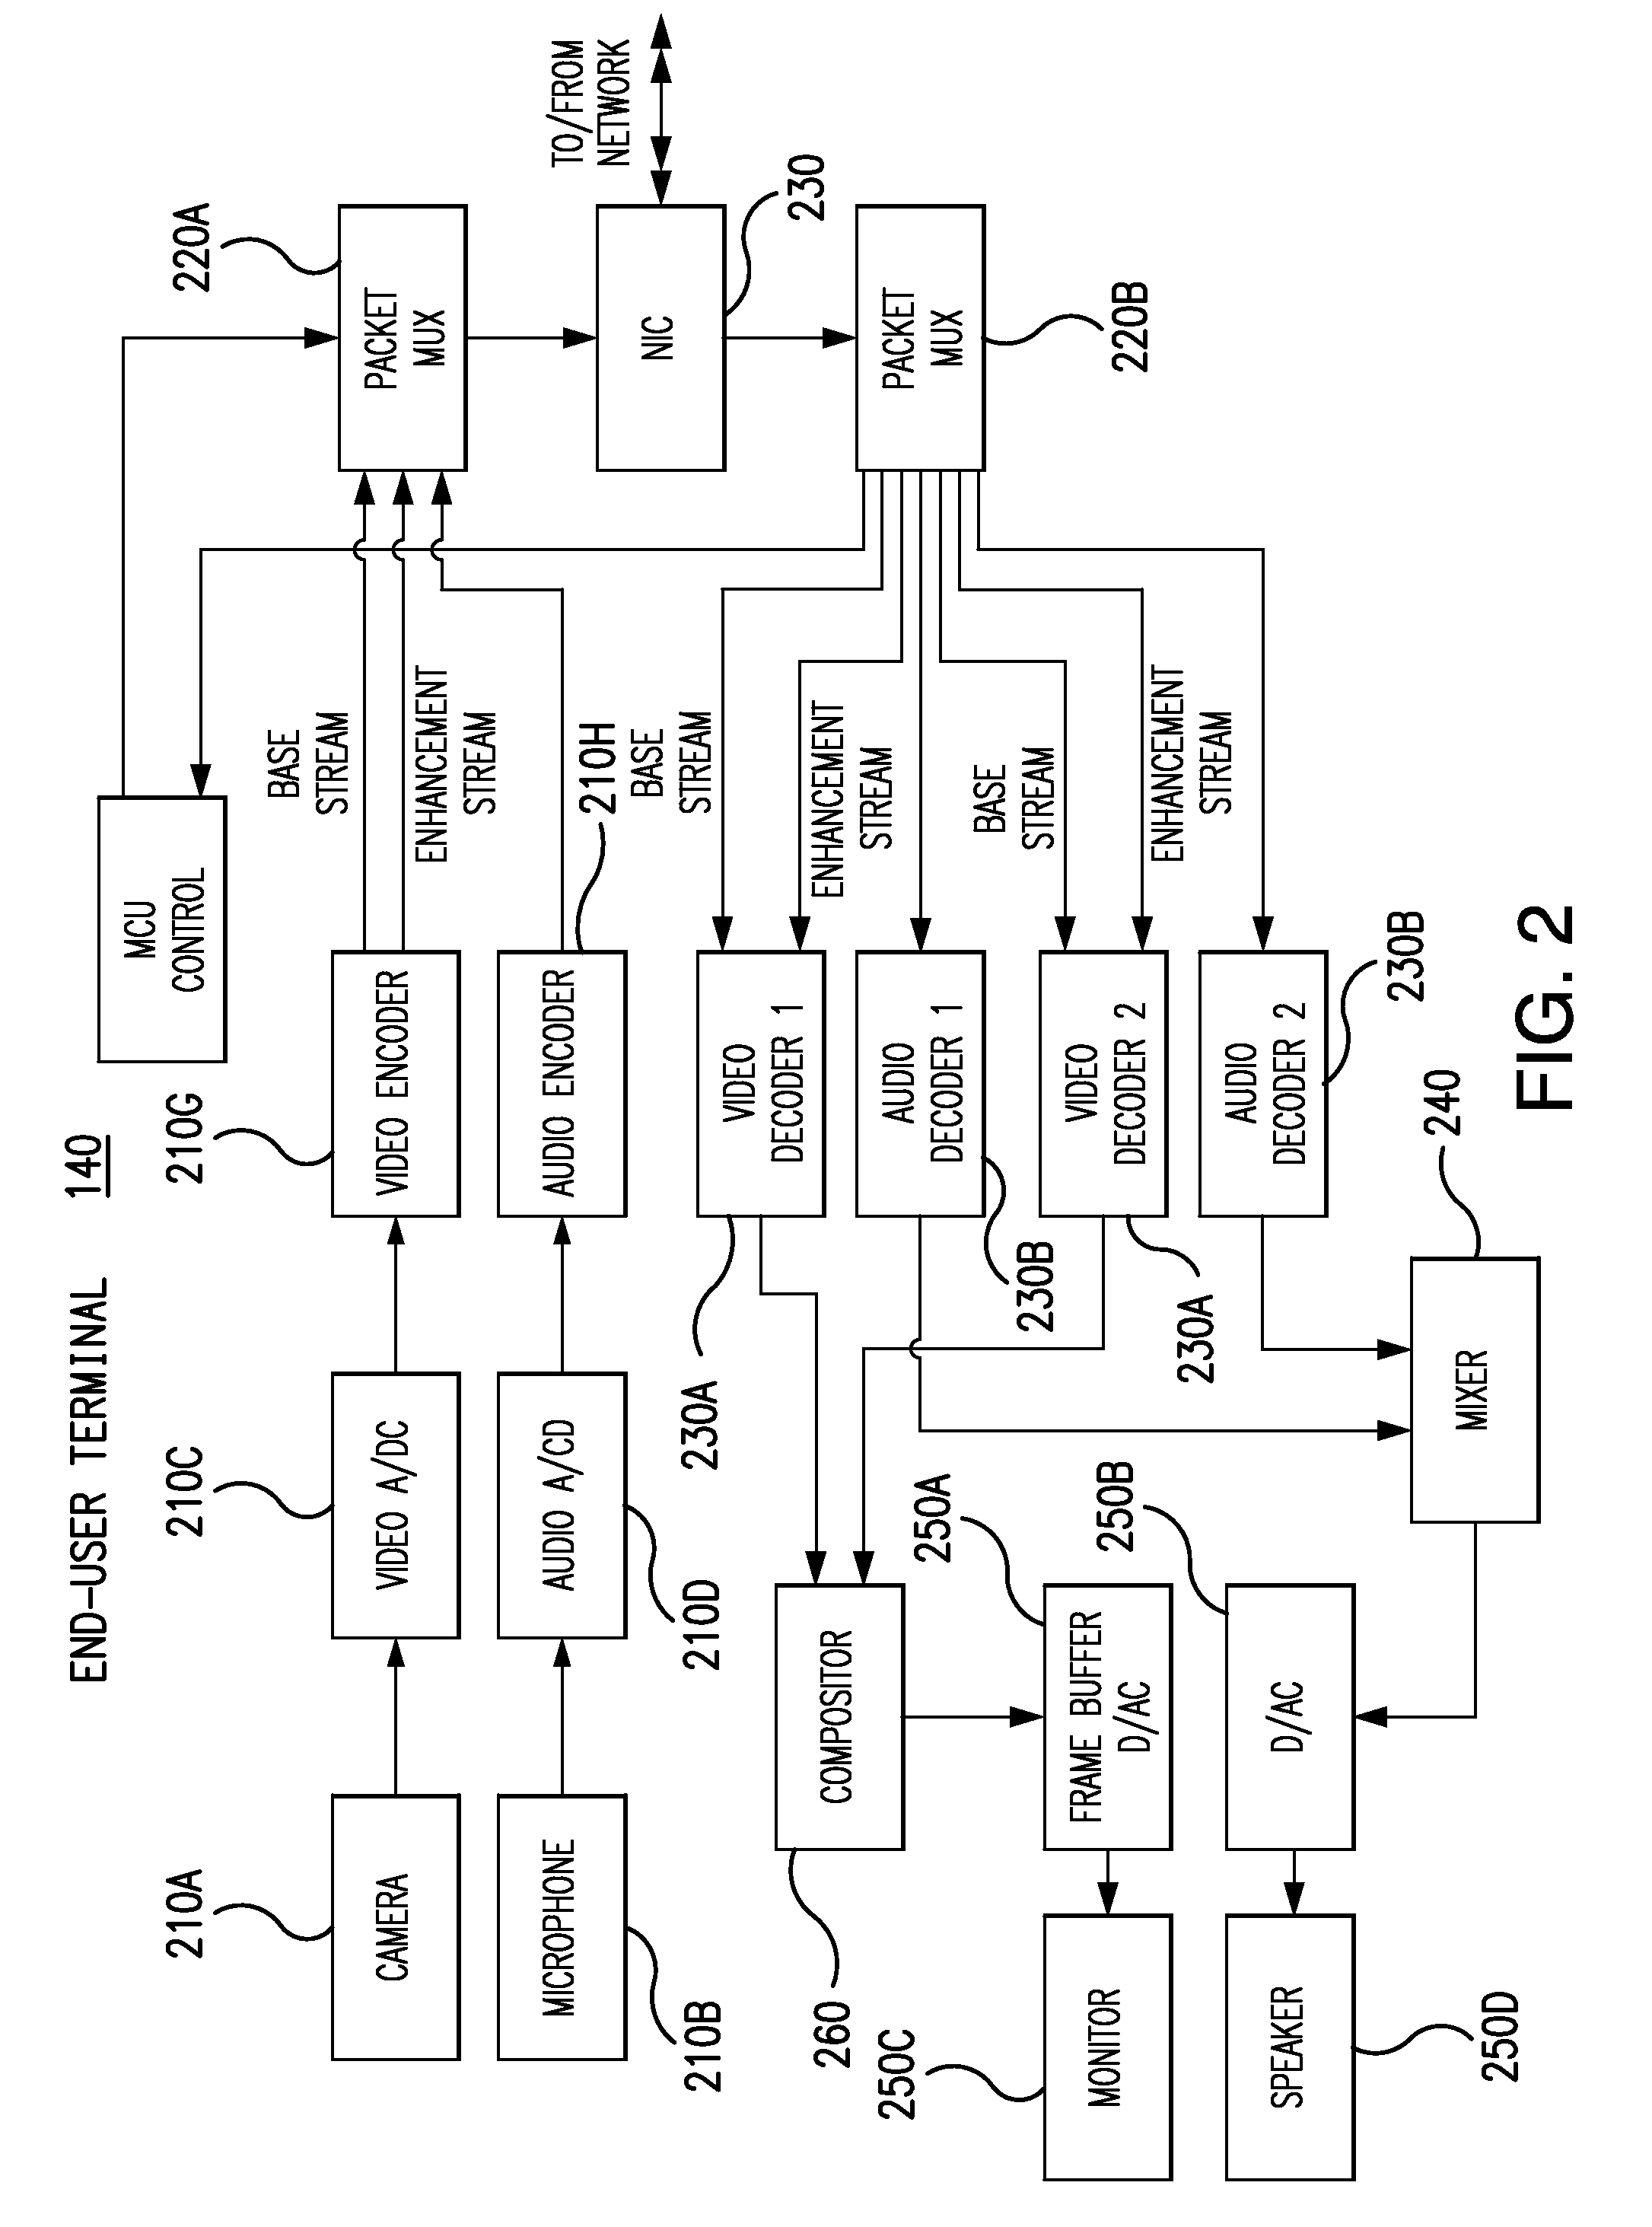 System and method for thinning of scalable video coding bit-streams